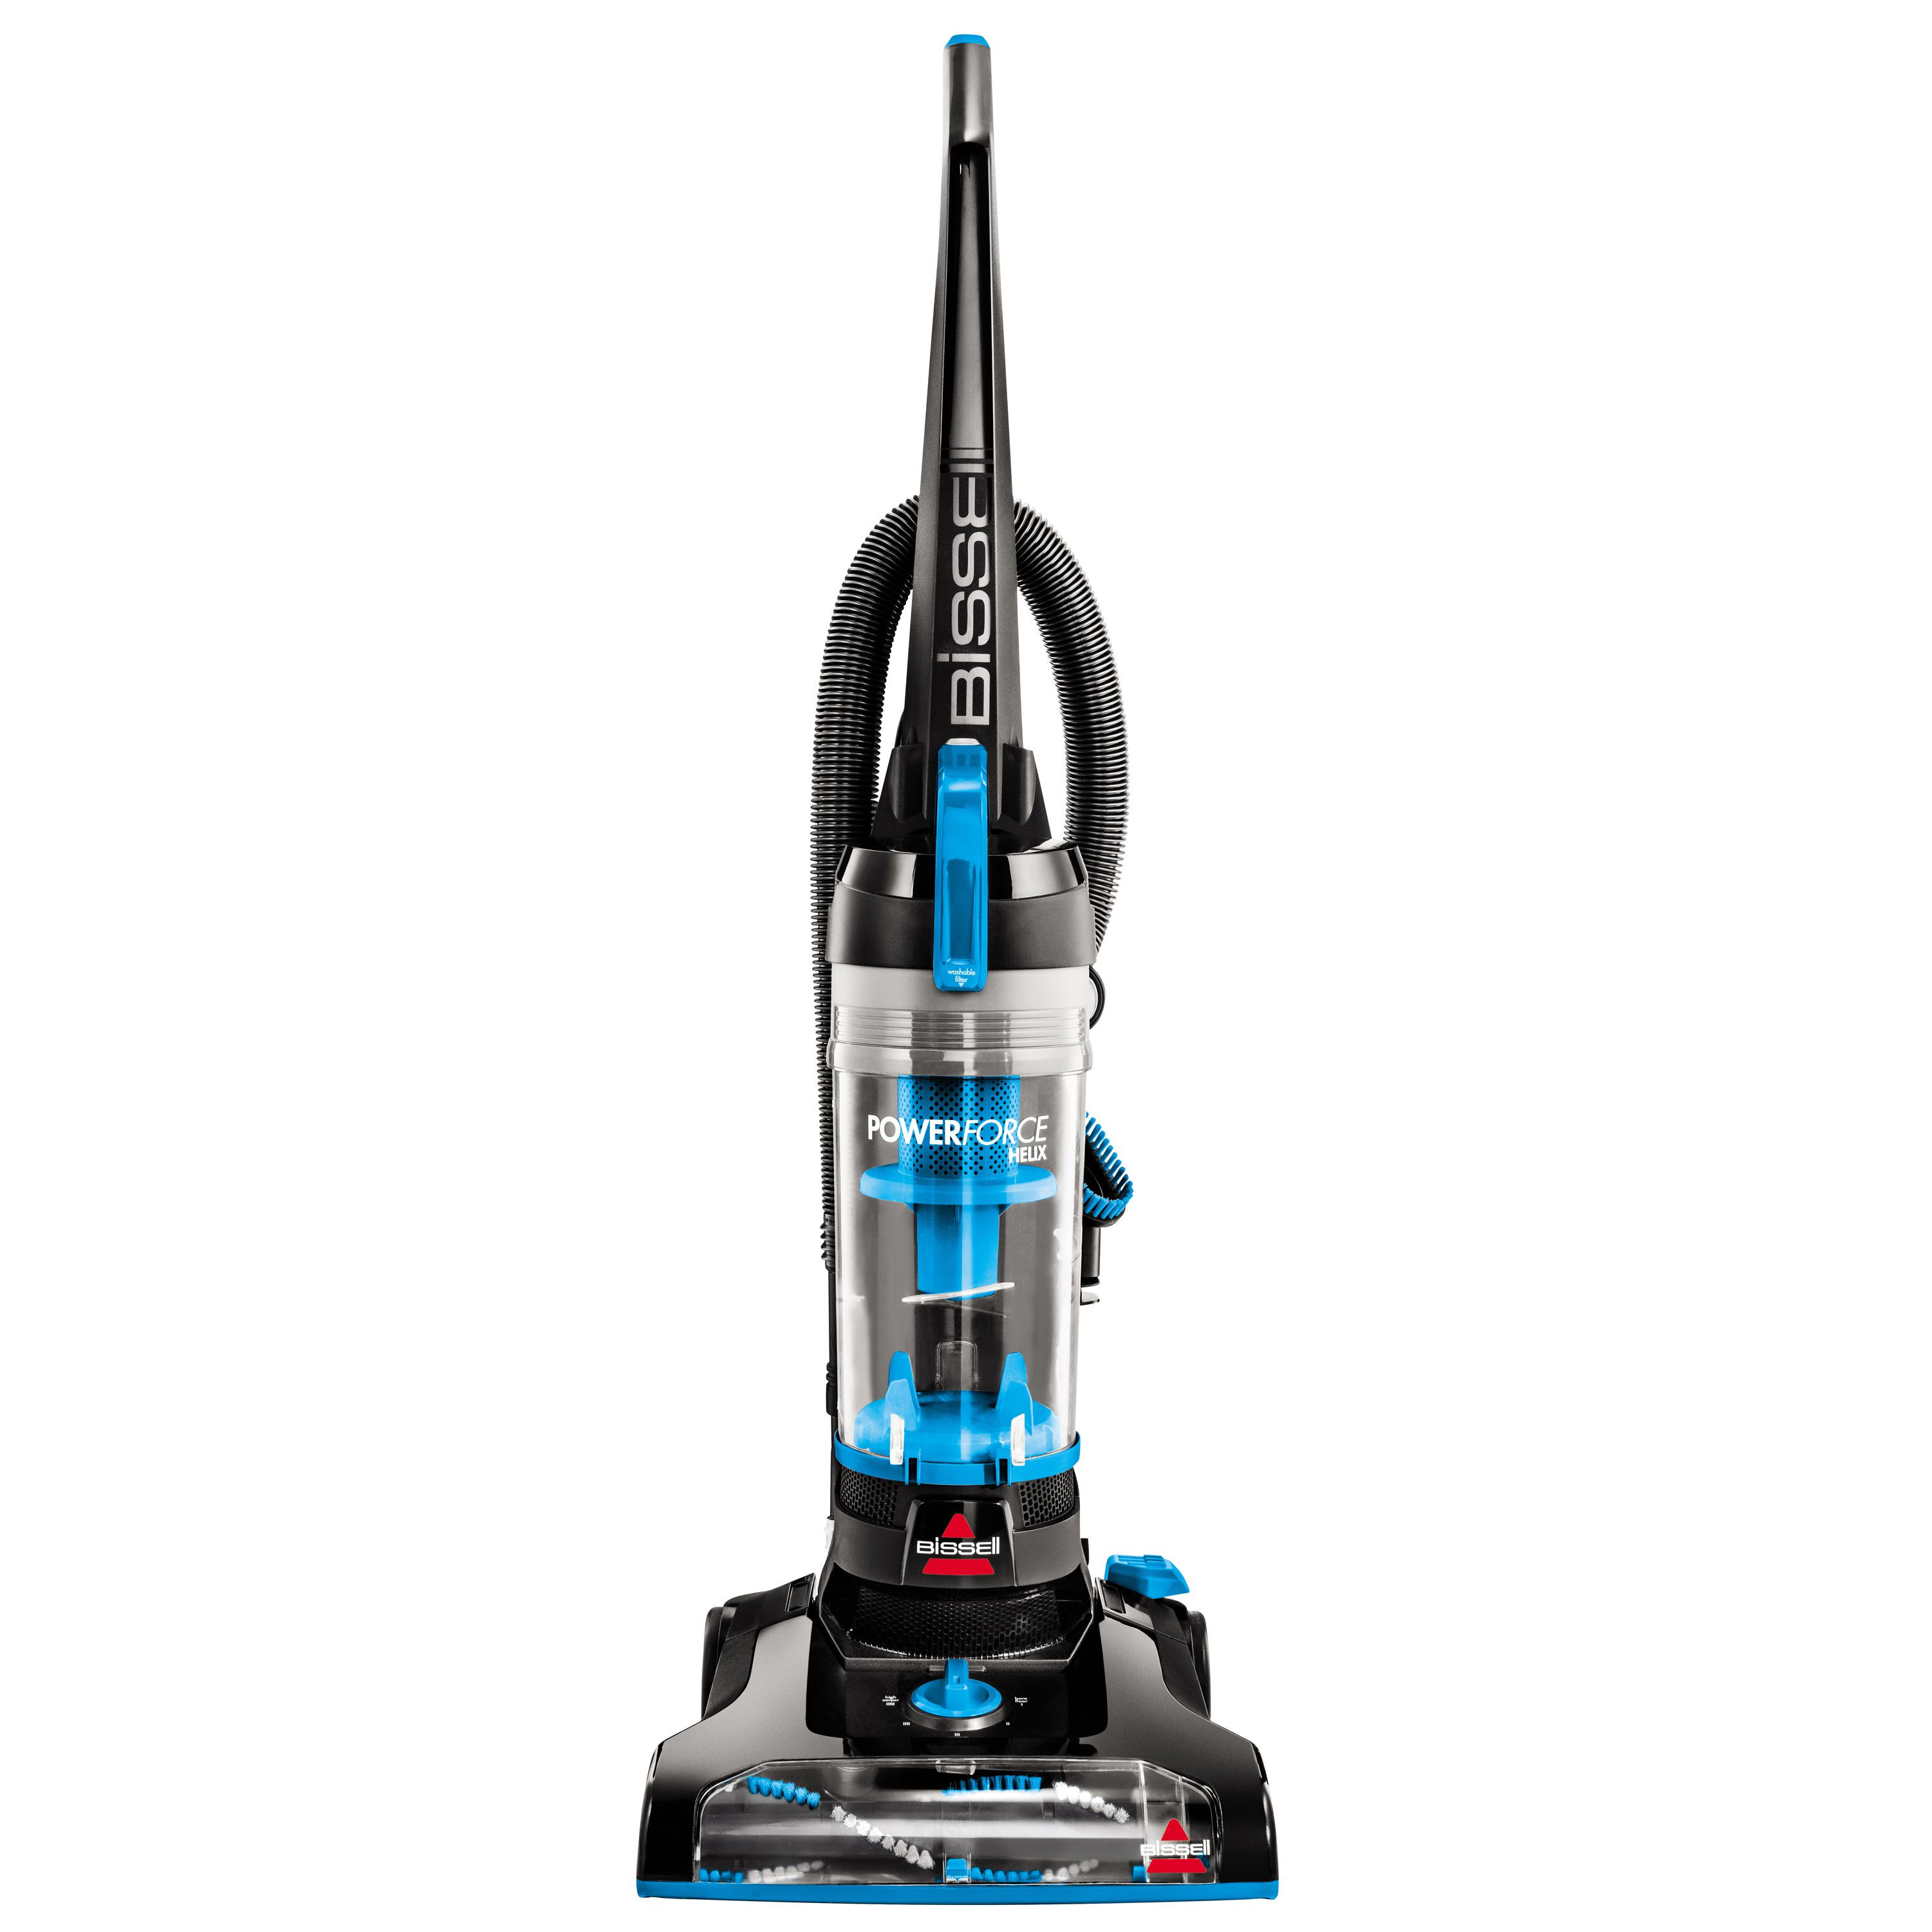 11 Lovable Lightweight Hardwood Floor Vacuum Reviews 2024 free download lightweight hardwood floor vacuum reviews of the 10 best vacuum cleaners to buy in 2018 pertaining to e4b12fd4 906f 4bf0 a270 afe8dc531860 1 c698176588ad49a4cf1bde639e9a838a 5bace08ac9e77c00